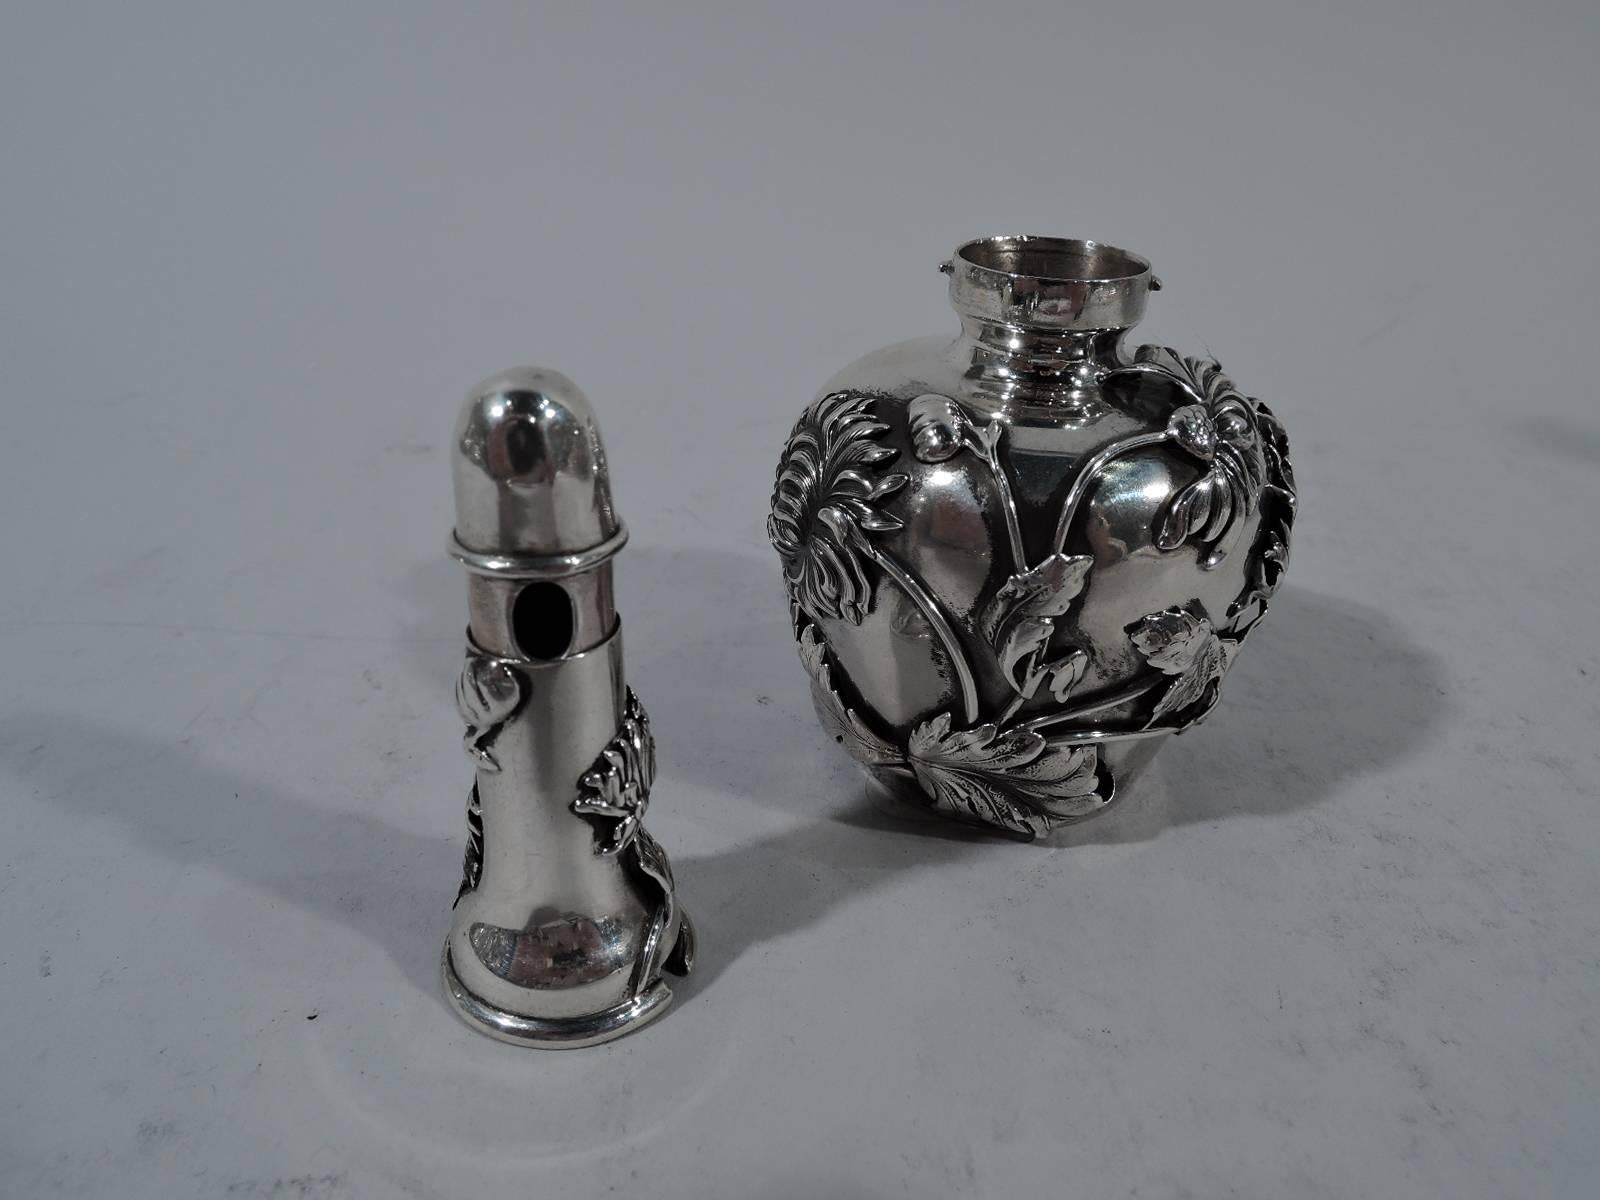 American Shiebler Aesthetic Sterling Silver Scent Bottle with Chrysanthemums